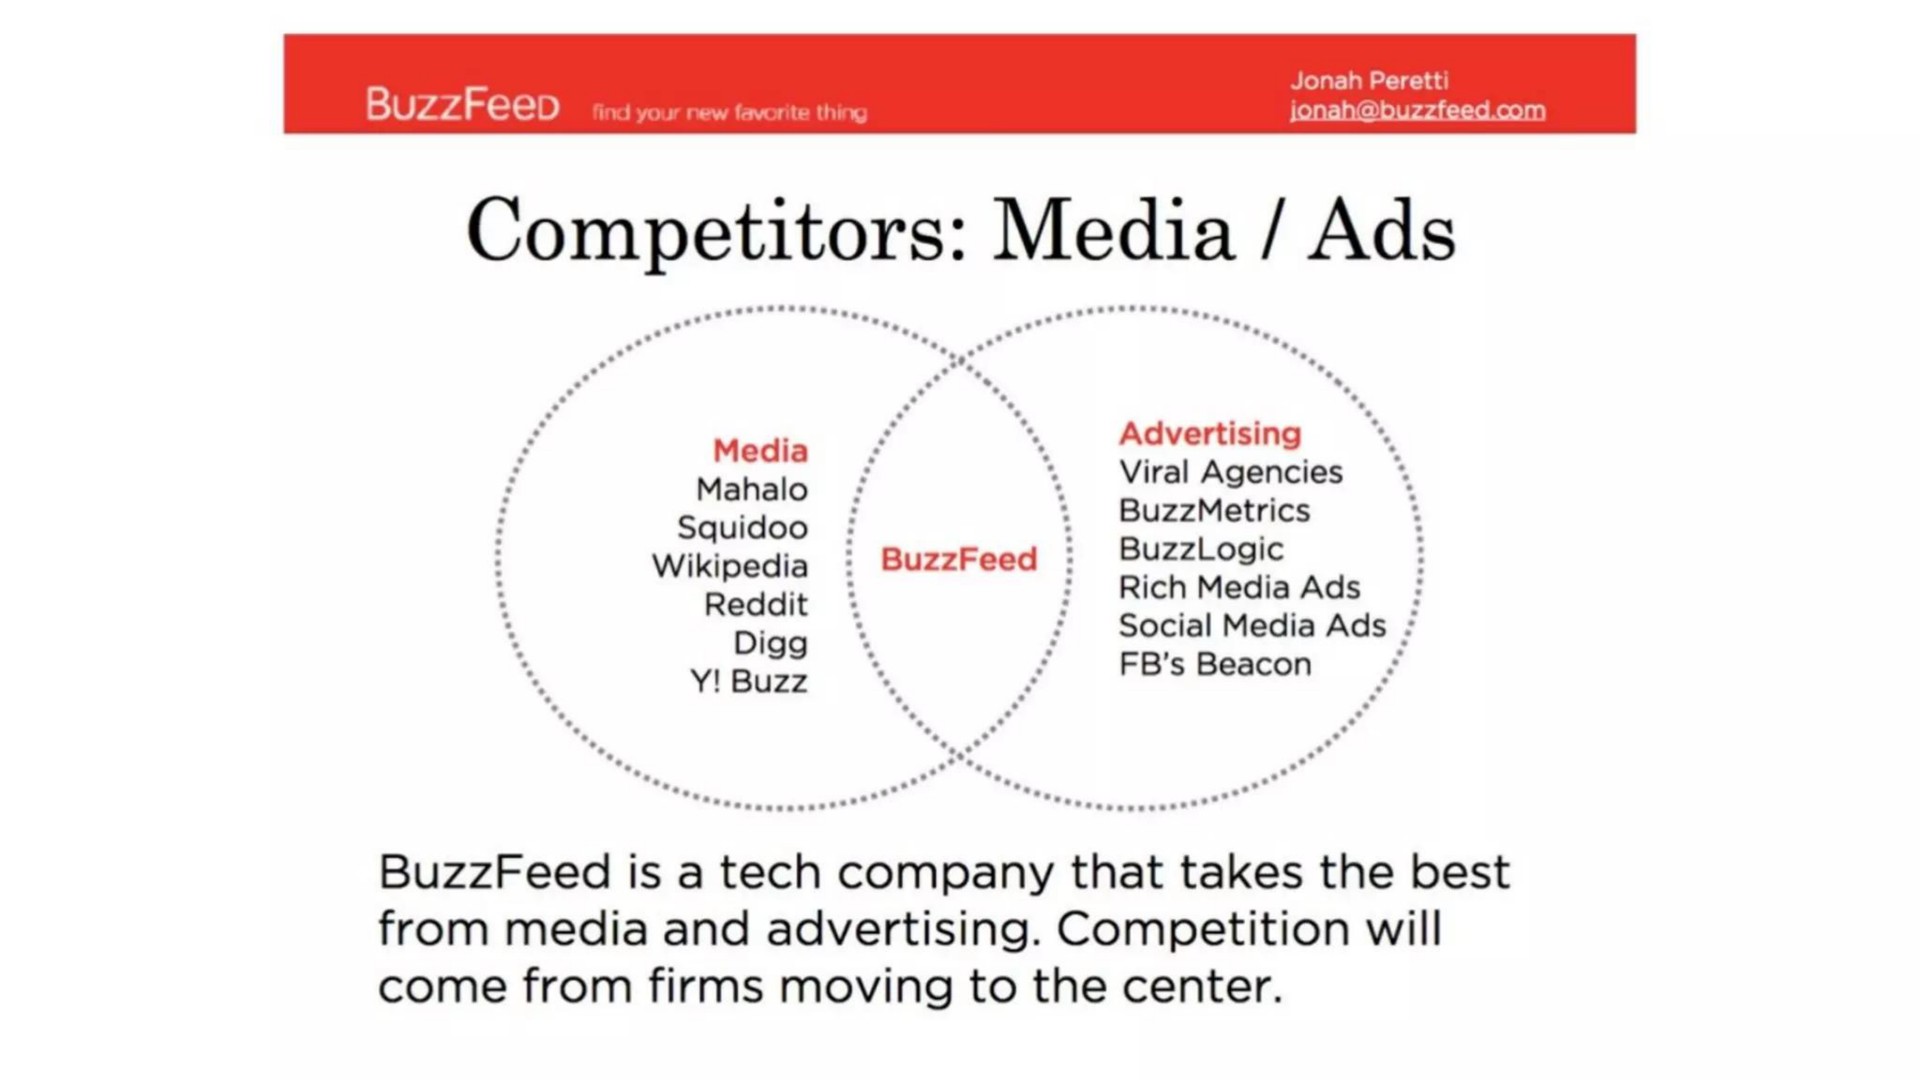 a ten hia competitors media ads media buzz advertising viral agencies ere social media ads beacon is a tech company that takes the best from media and advertising competition will come from firms moving to the center | BuzzFeed